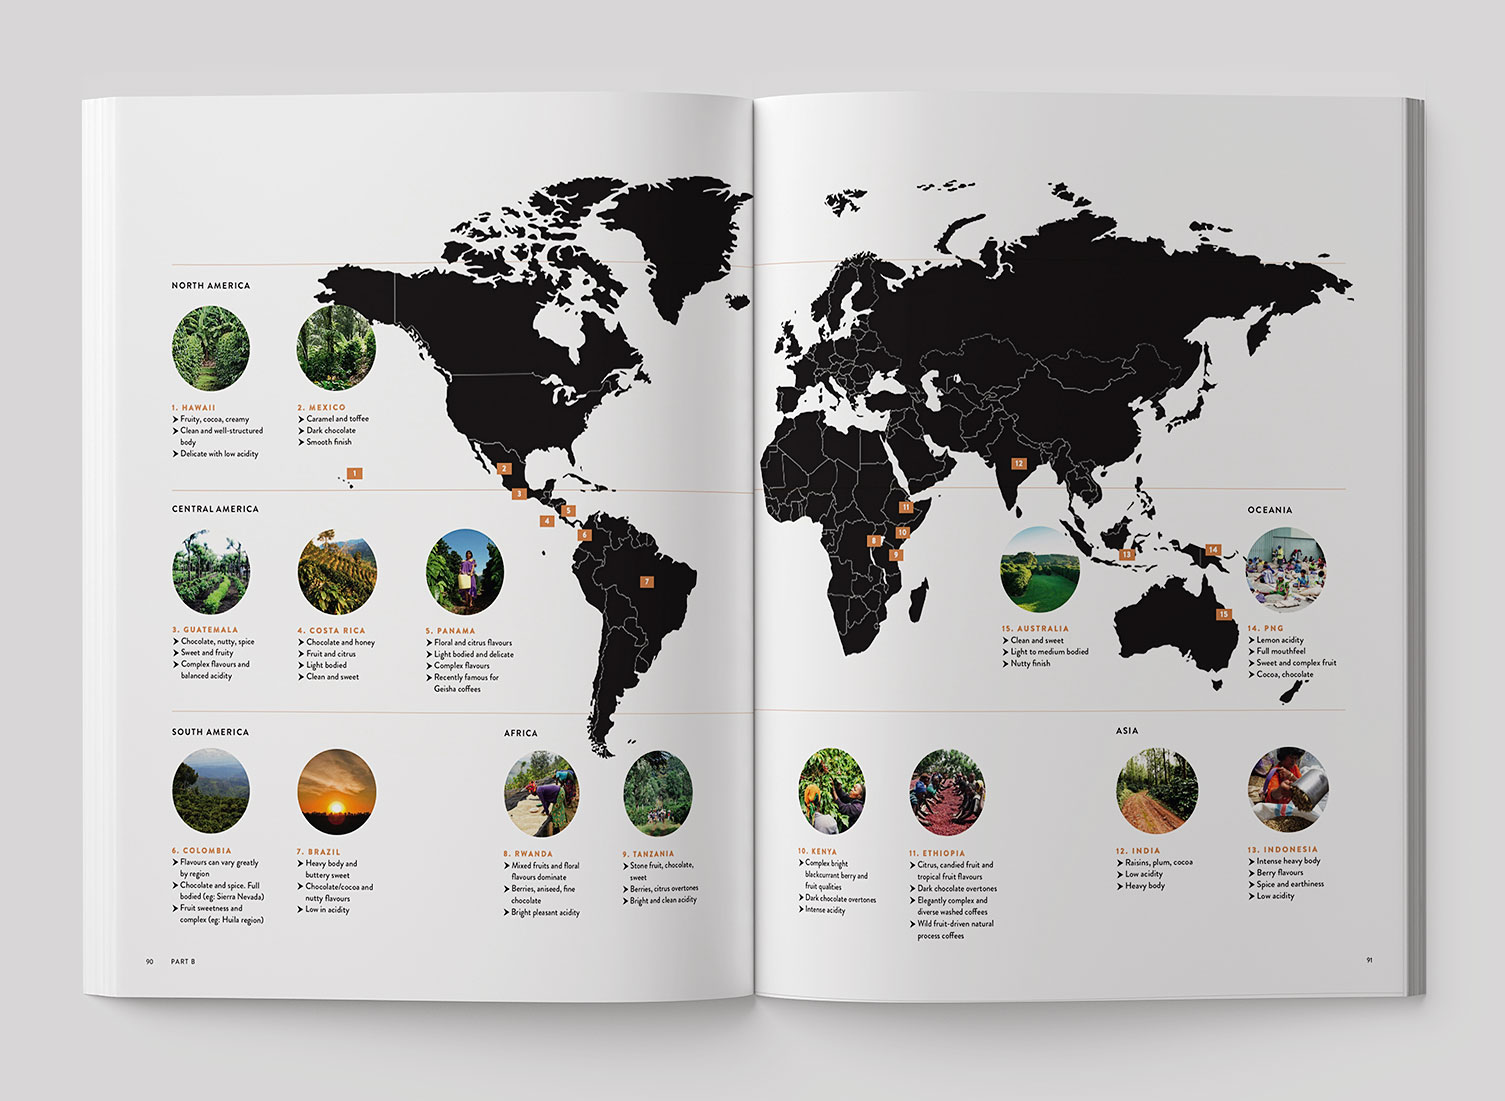 Mapping coffee origins the world over